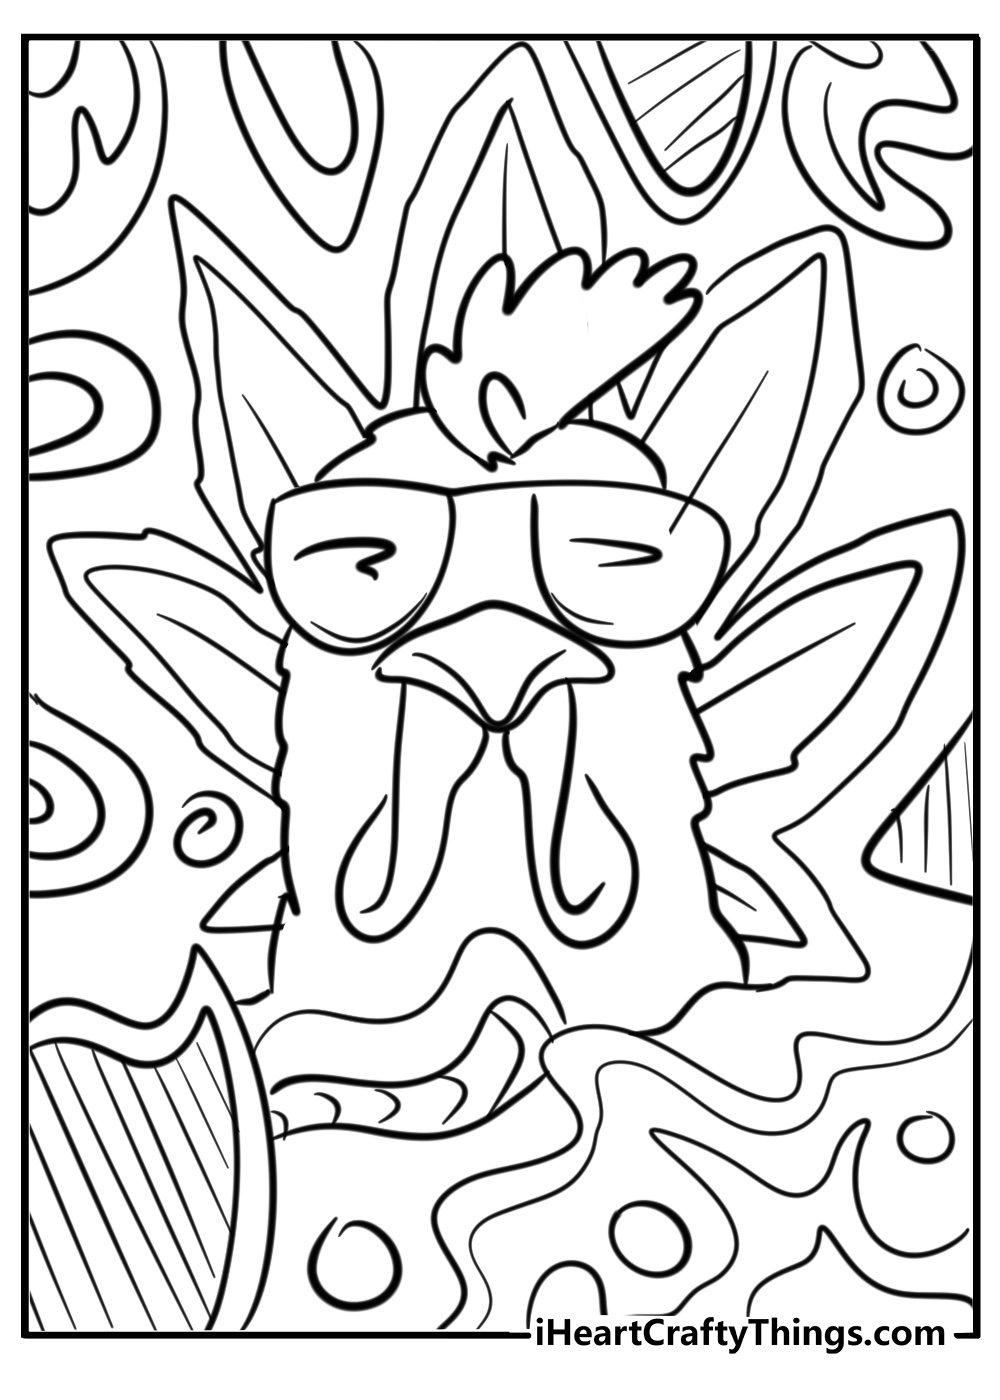 Dope coloring pages for adults